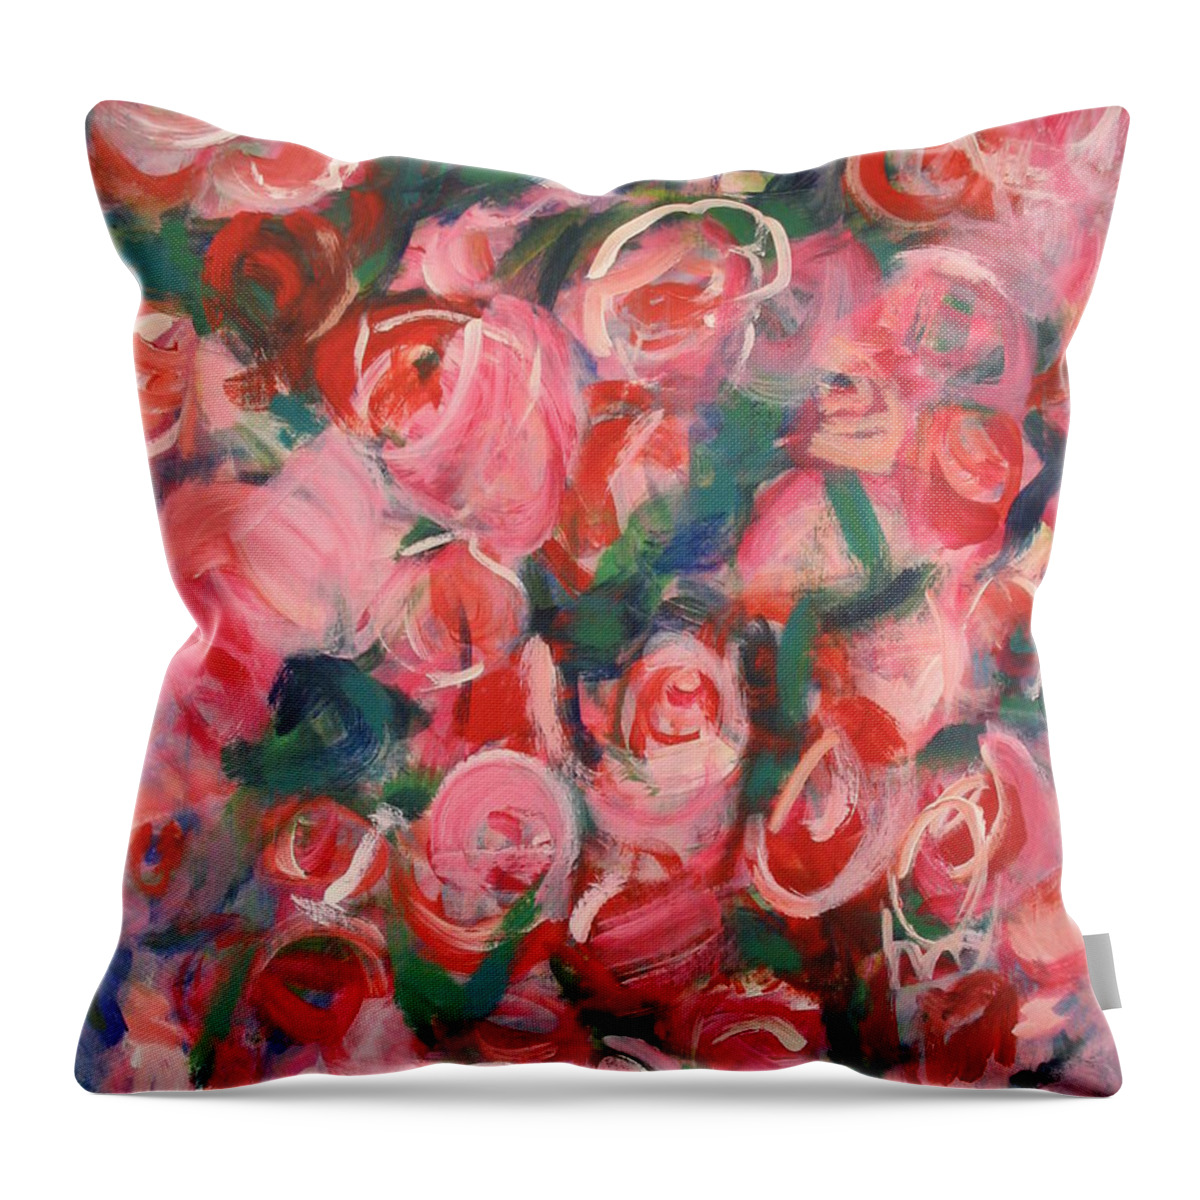 Roses Throw Pillow featuring the painting Roses by Fereshteh Stoecklein